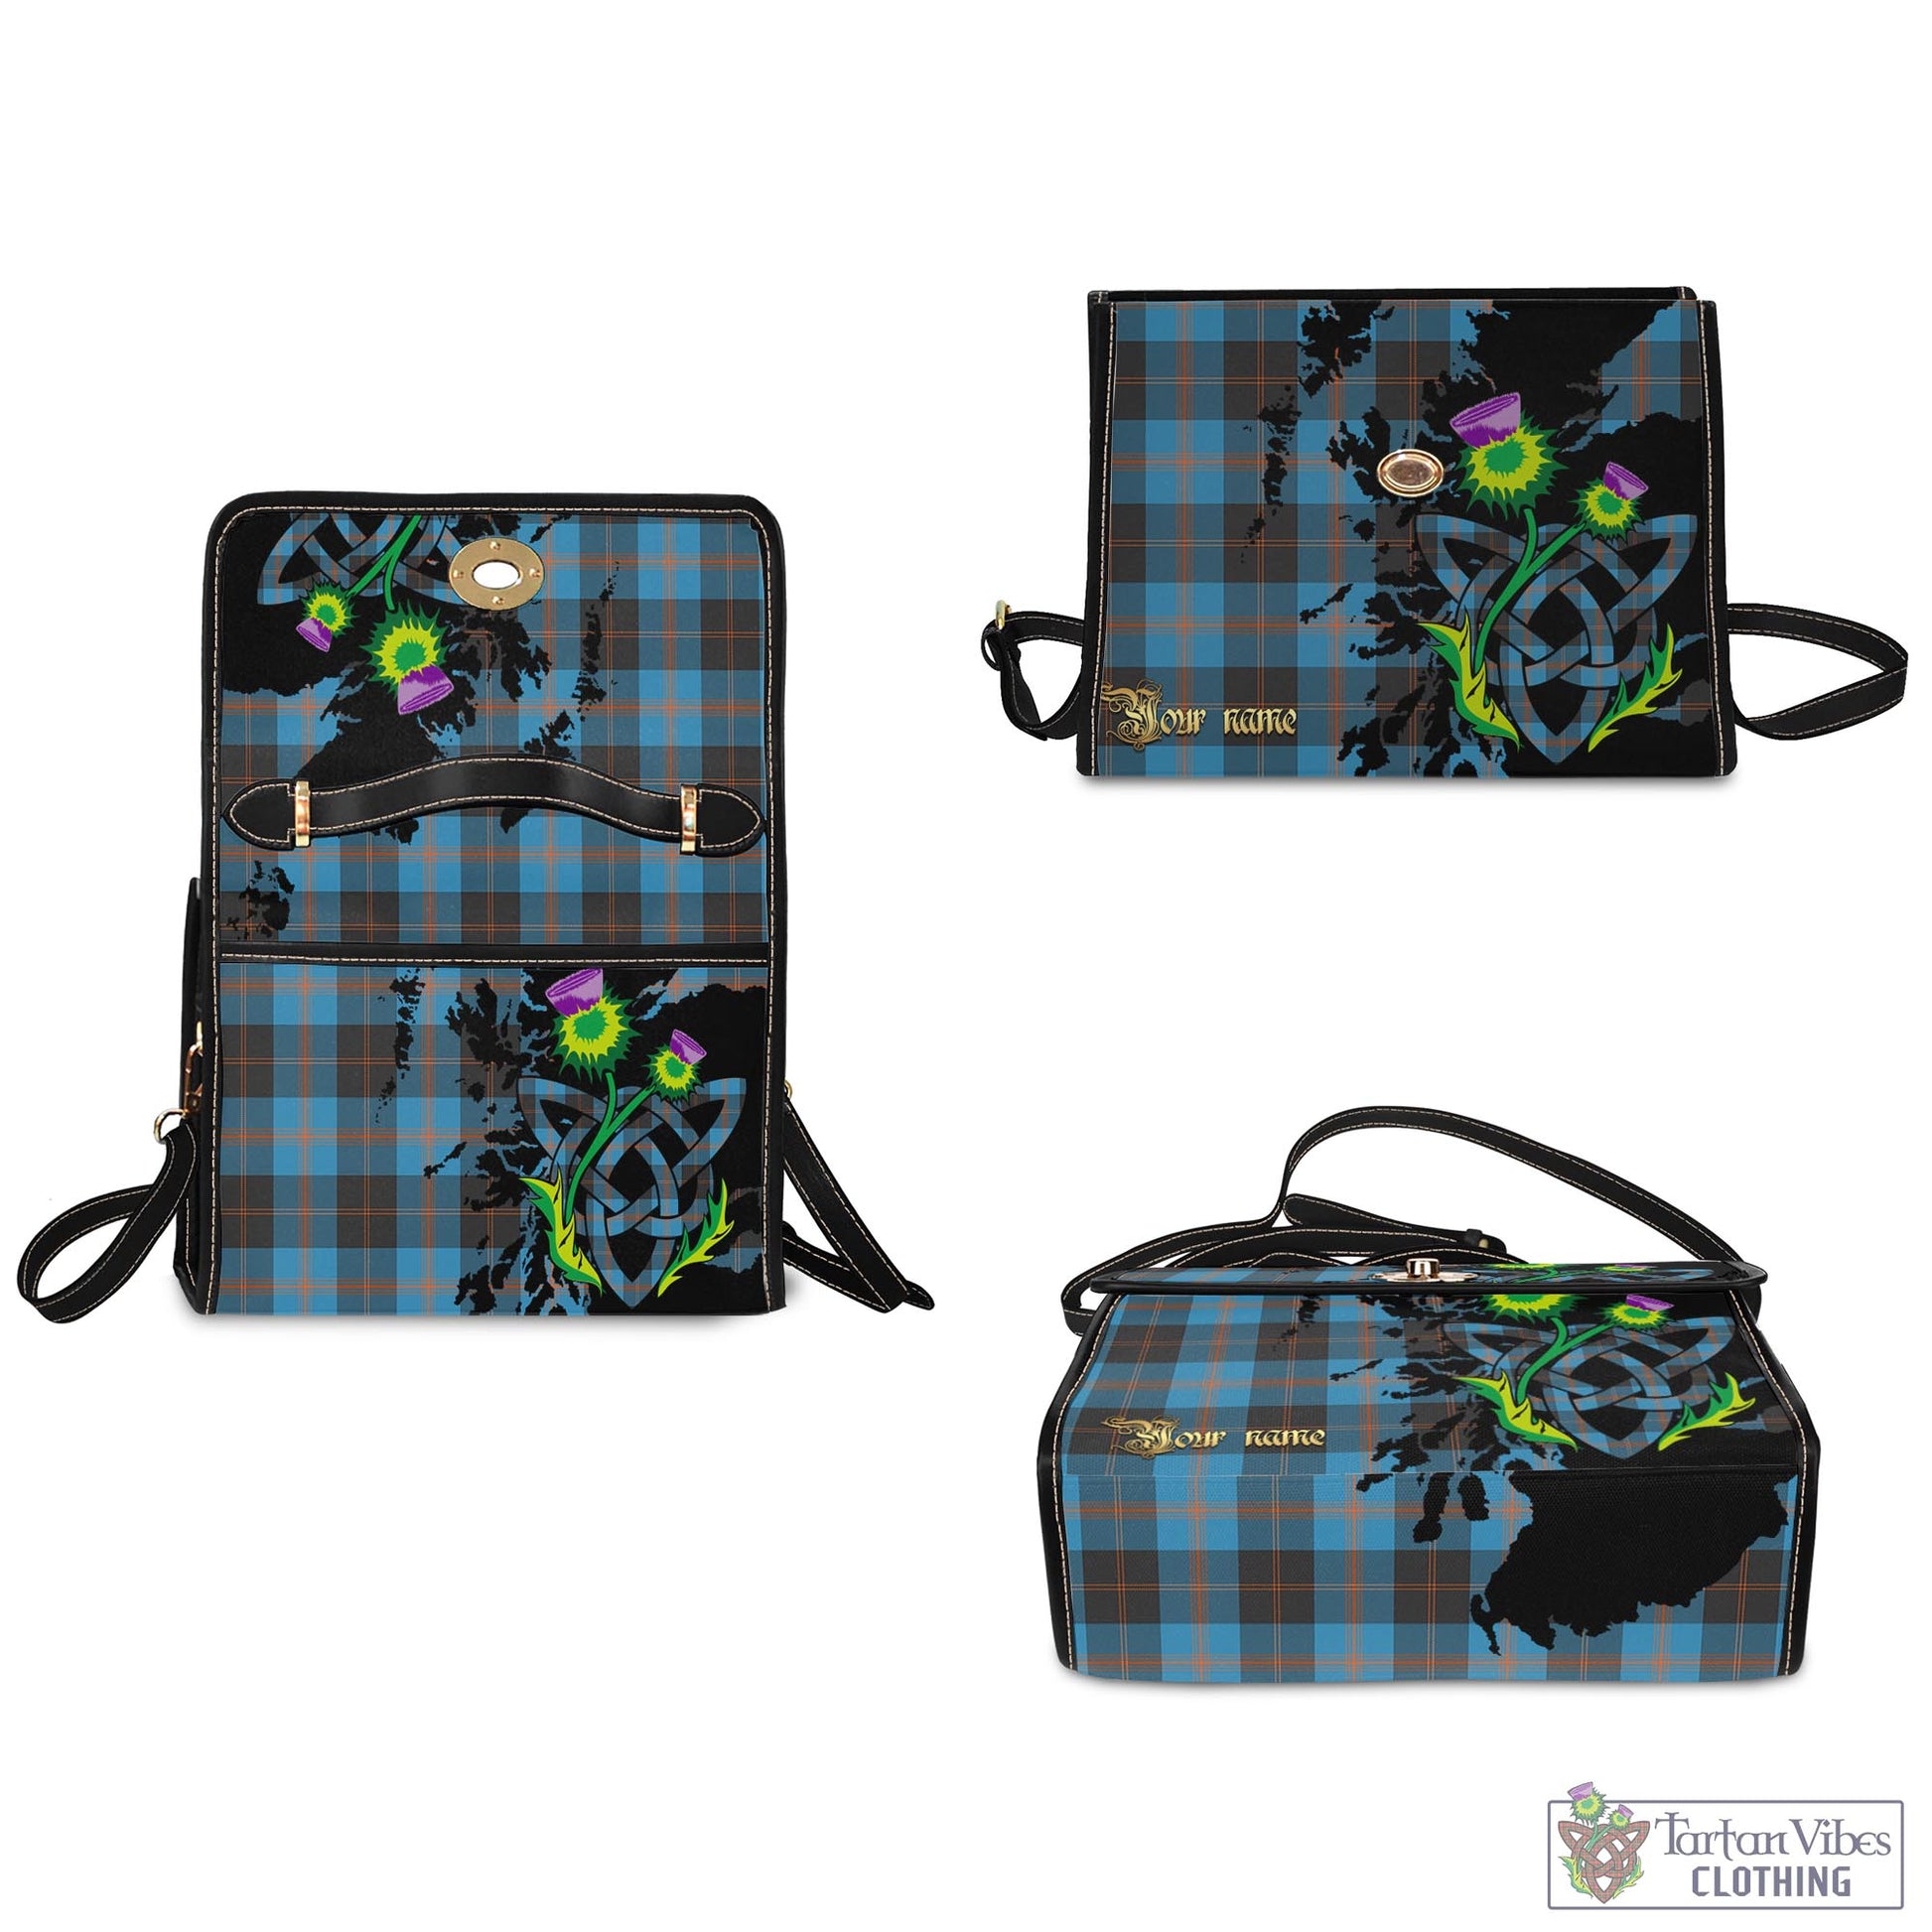 Tartan Vibes Clothing Horsburgh Tartan Waterproof Canvas Bag with Scotland Map and Thistle Celtic Accents